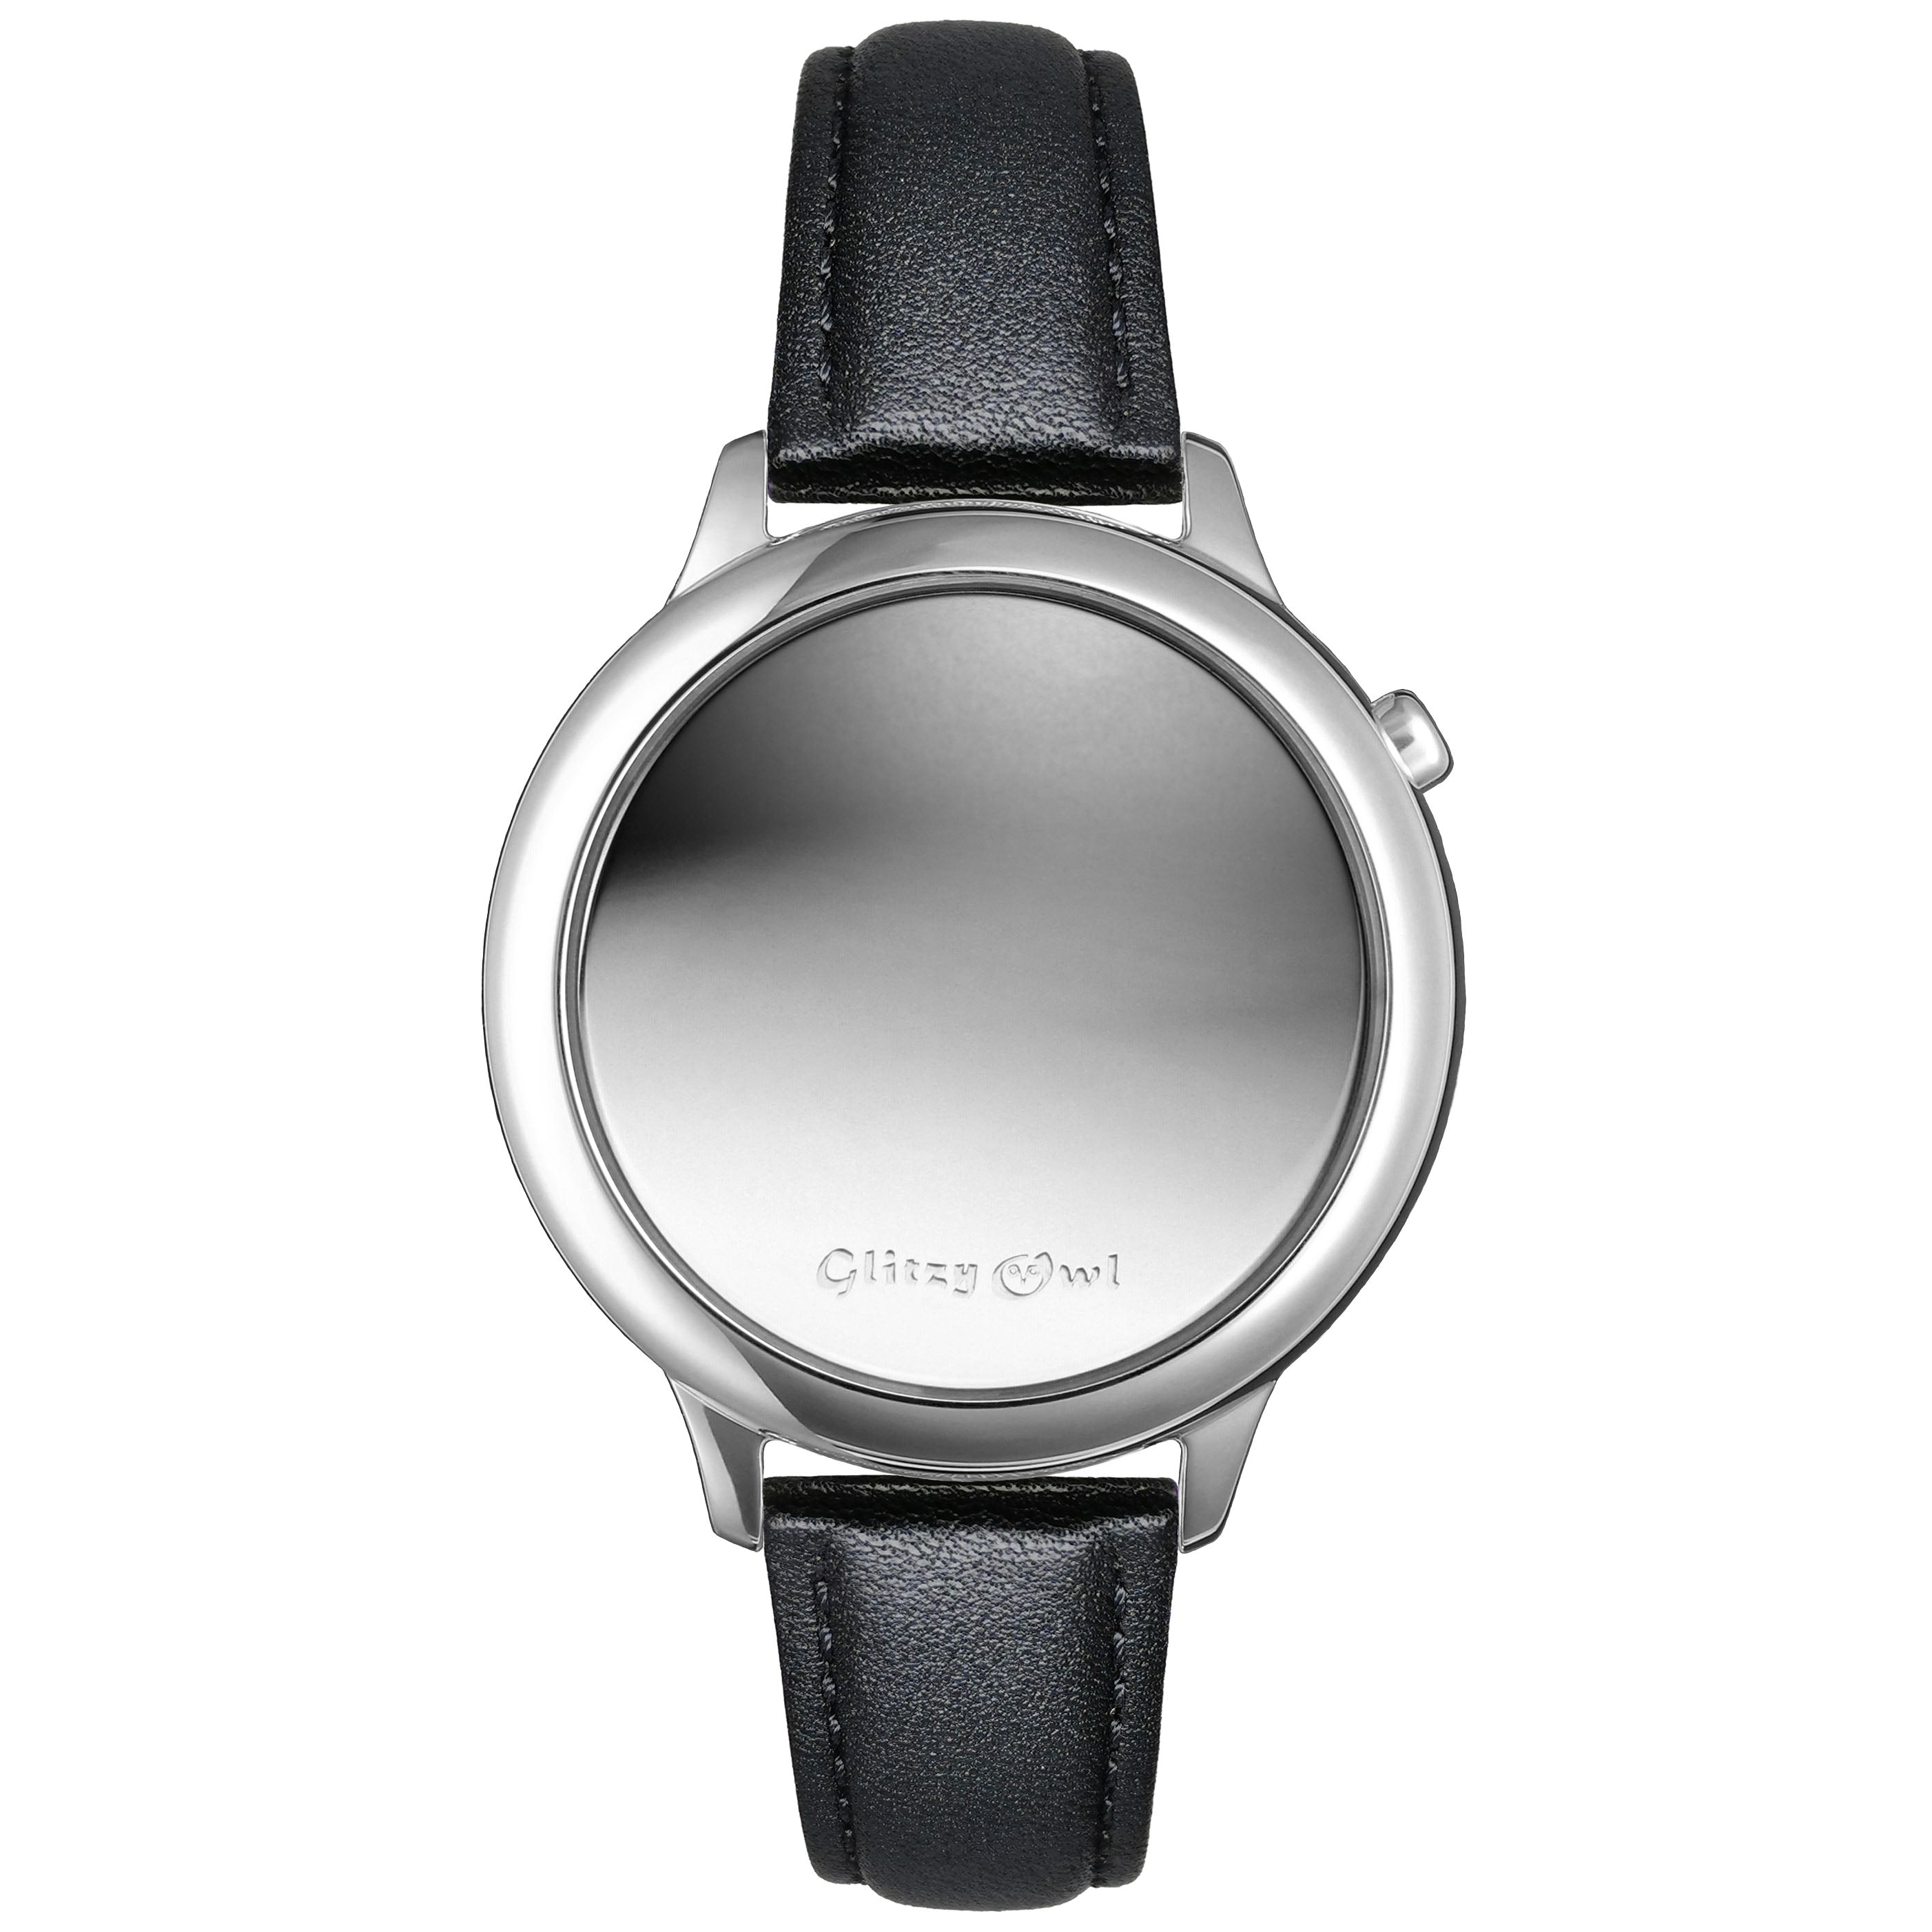 THE BUBBLE LED Stainless Steel Black Leather Watch